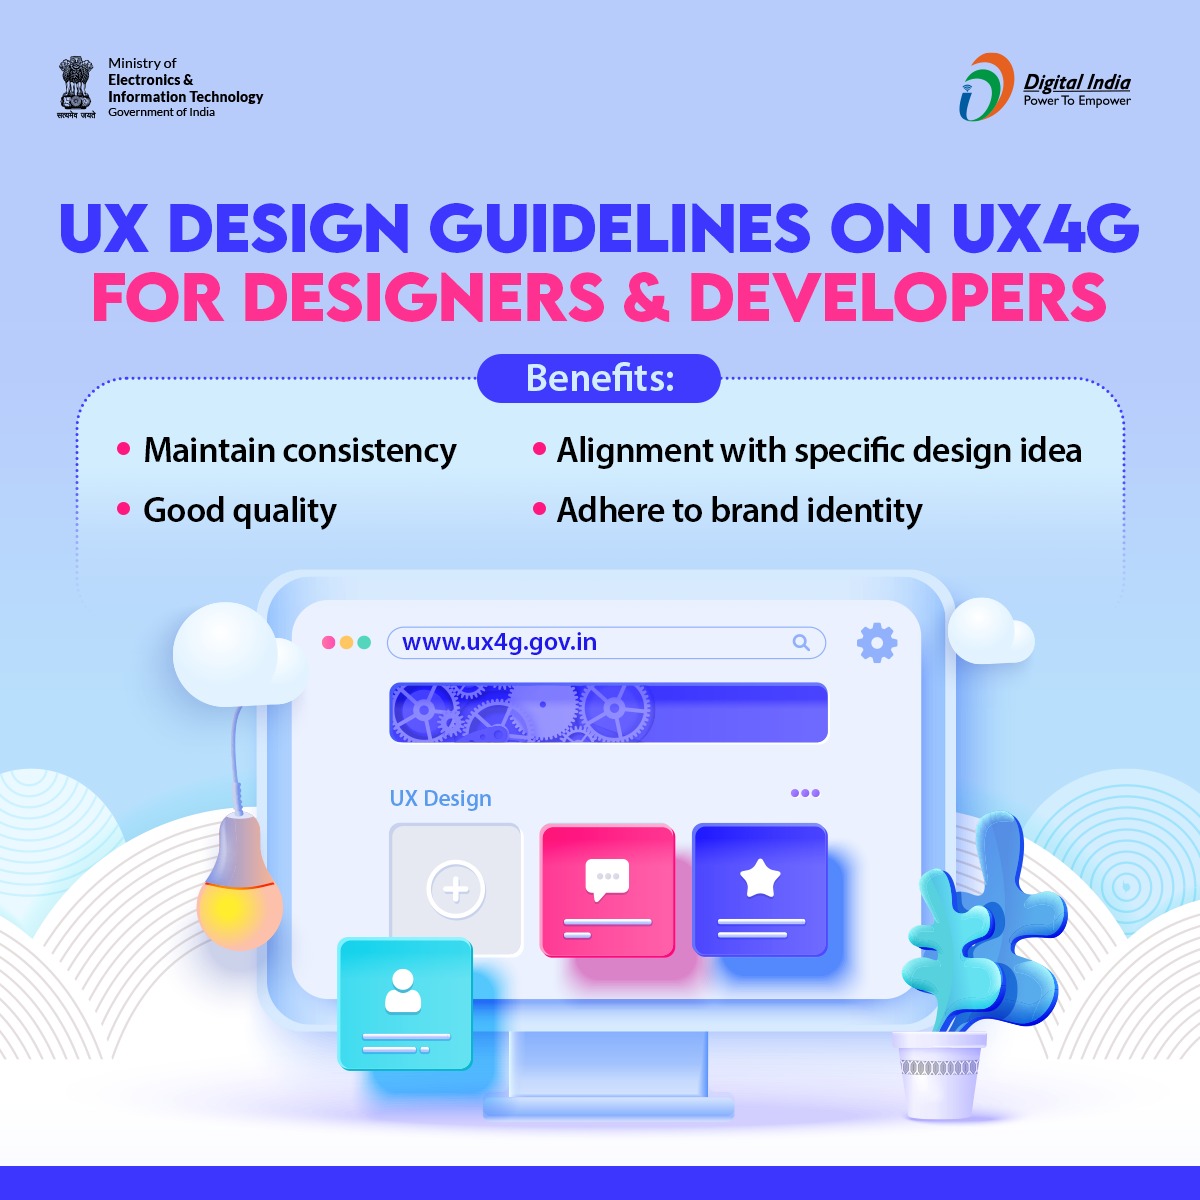 #UXDesign guidelines are a set of established principles, rules and recommendations that serve as a reference for designers, developers and other stakeholders when creating digital applications. Visit ux4g.gov.in/design-guideli… #DigitalIndia @ux_4g